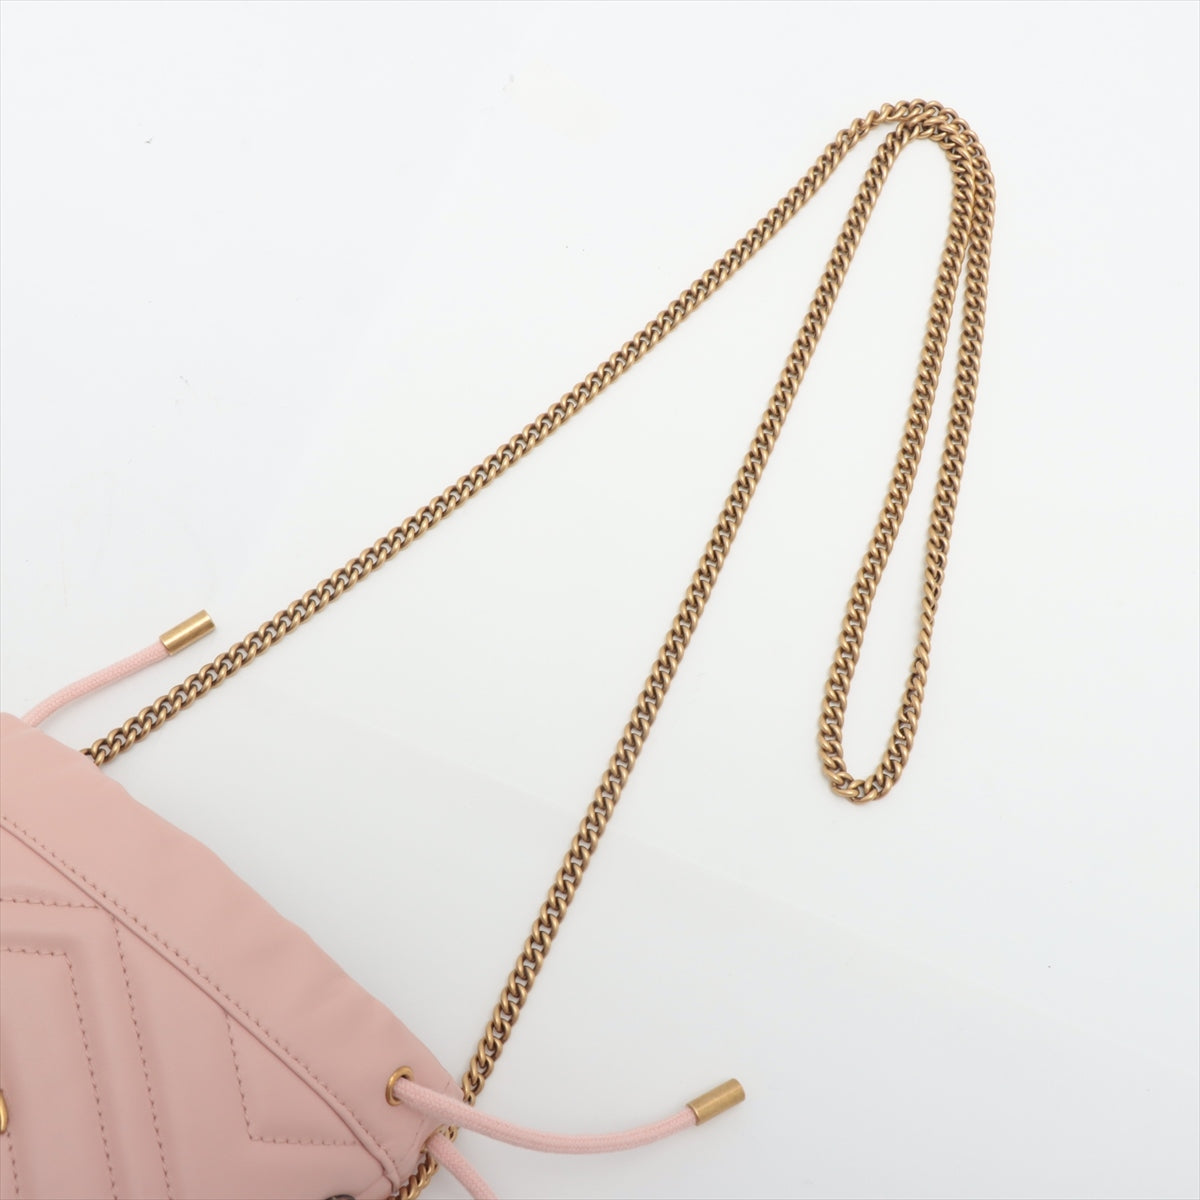 Gucci GG Marmont Leather Chain shoulder bag Pink 575163